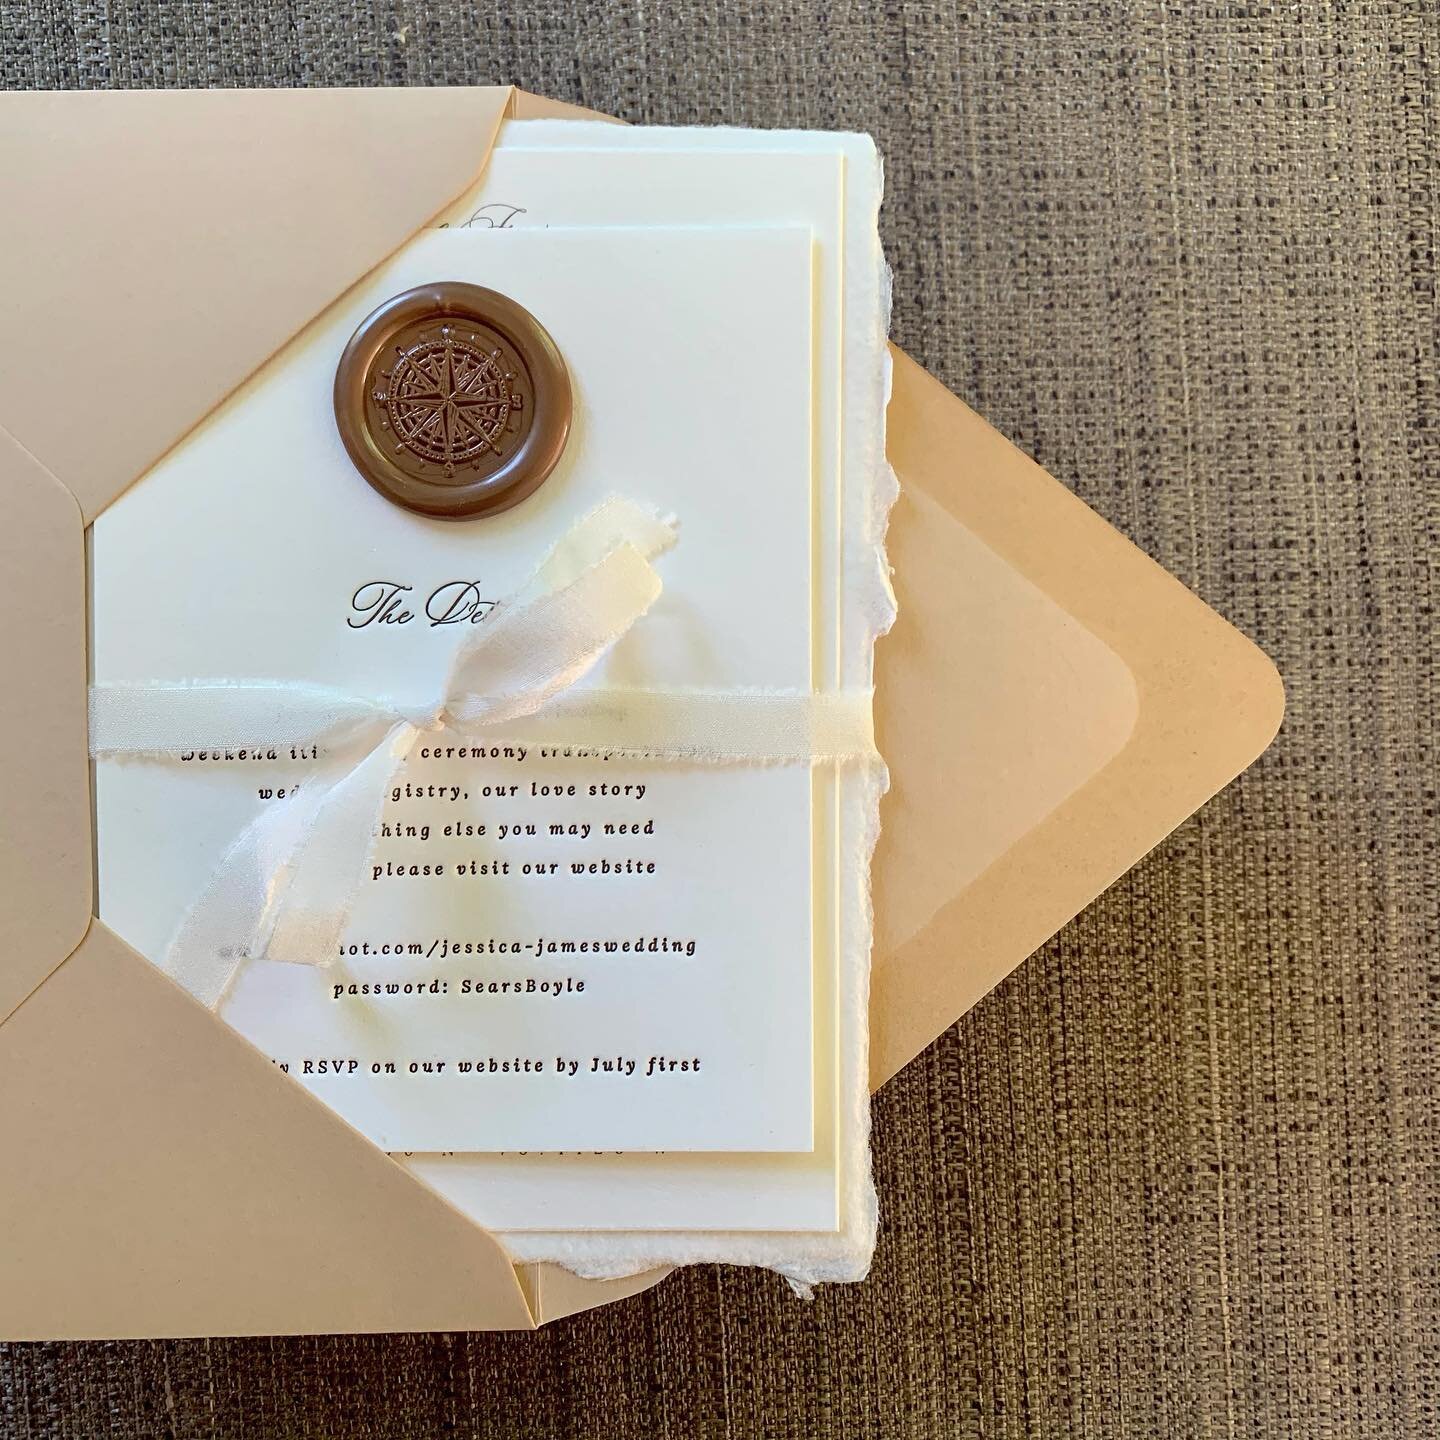 Luxury is in the details 
-
I am excited to give you a glimpse of the invitation suite I designed for James and Jessica. It&rsquo;s my favorite to date. 
-
Rust letterpress on a mix of handmade and cotton paper. Copper wax seal. Silk ribbon. Beautifu